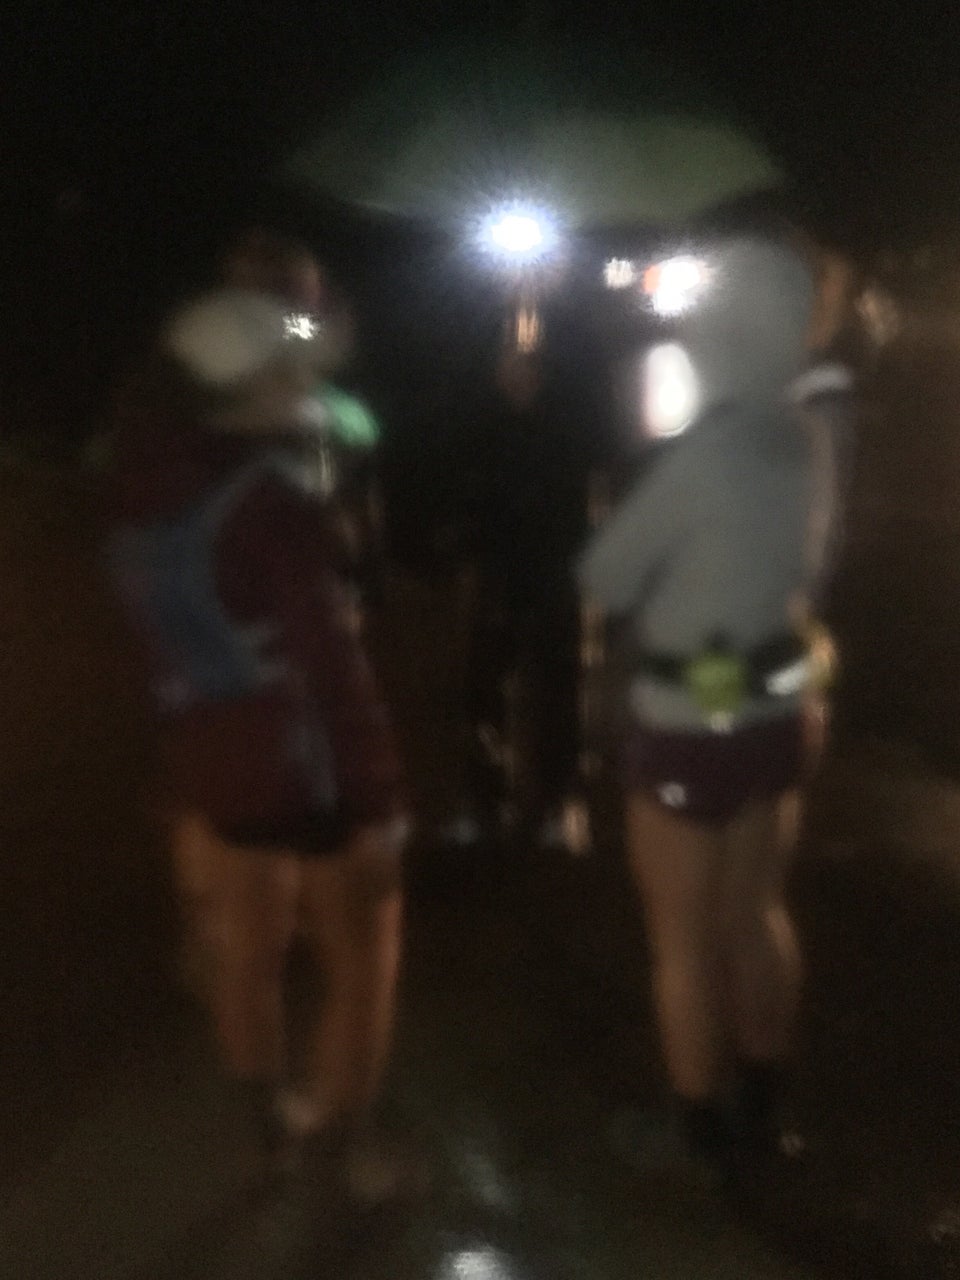 Blurry image of a few runners in rain gear and shorts on both sides of Bryan wearing a lit headlamp holding a green umbrella.